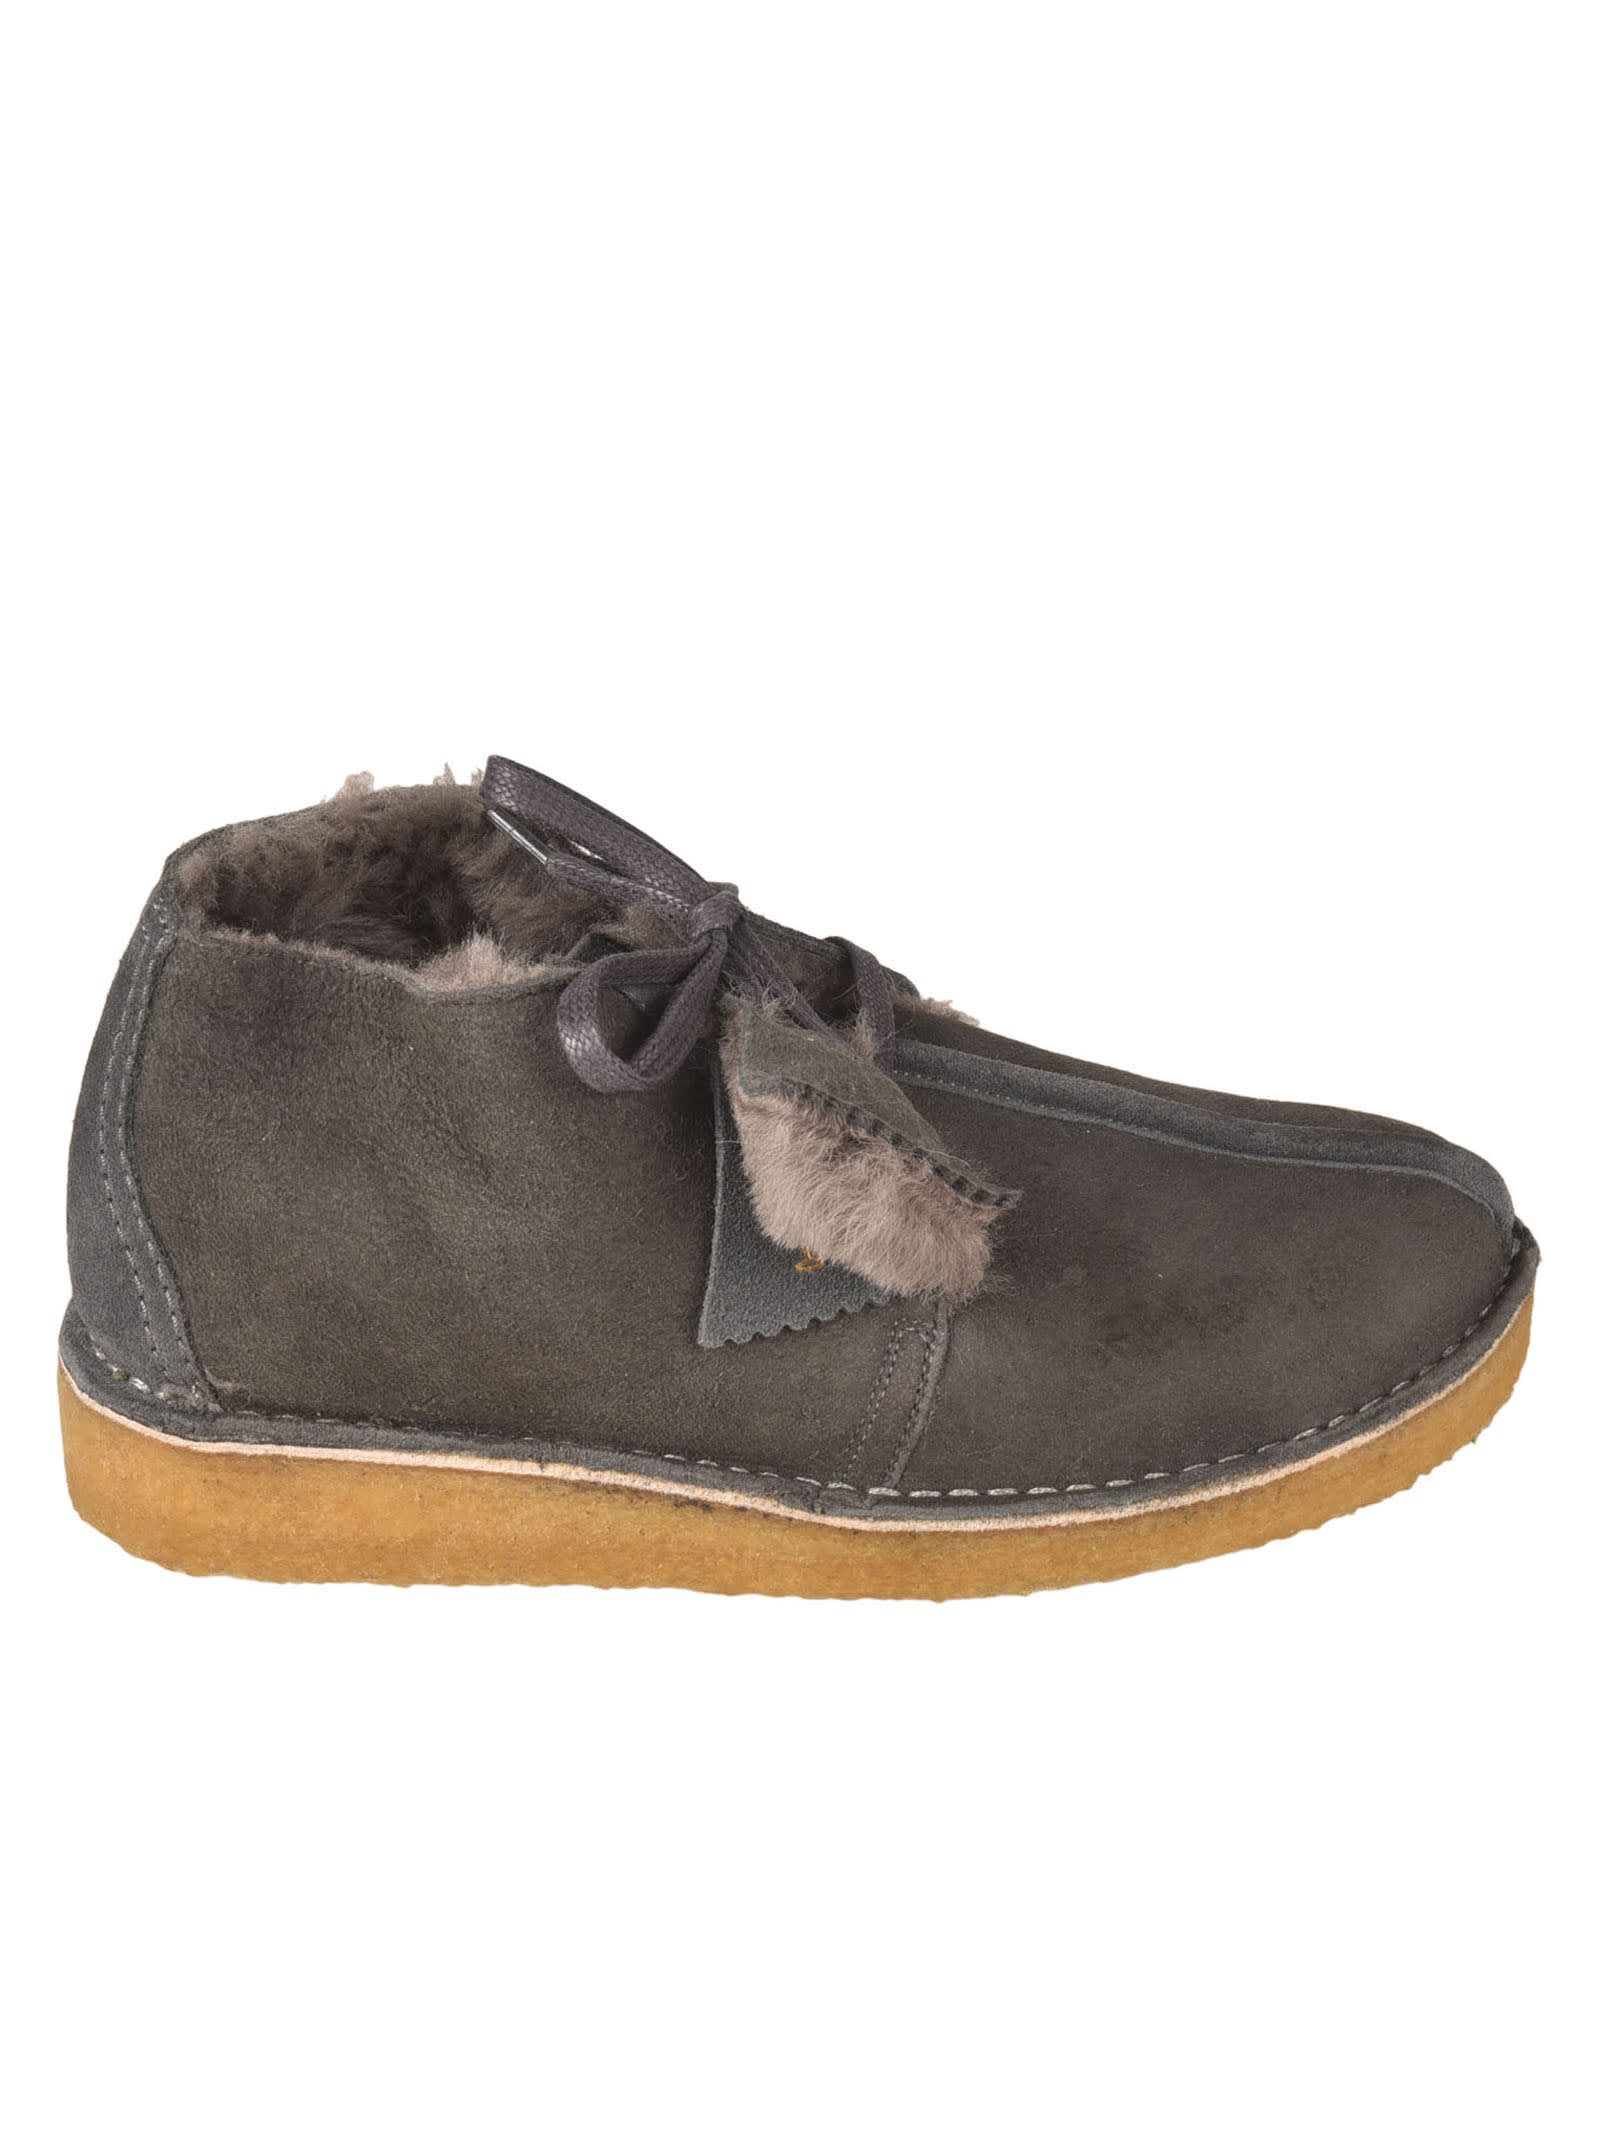 Clarks Furred Inside Boots In Grey